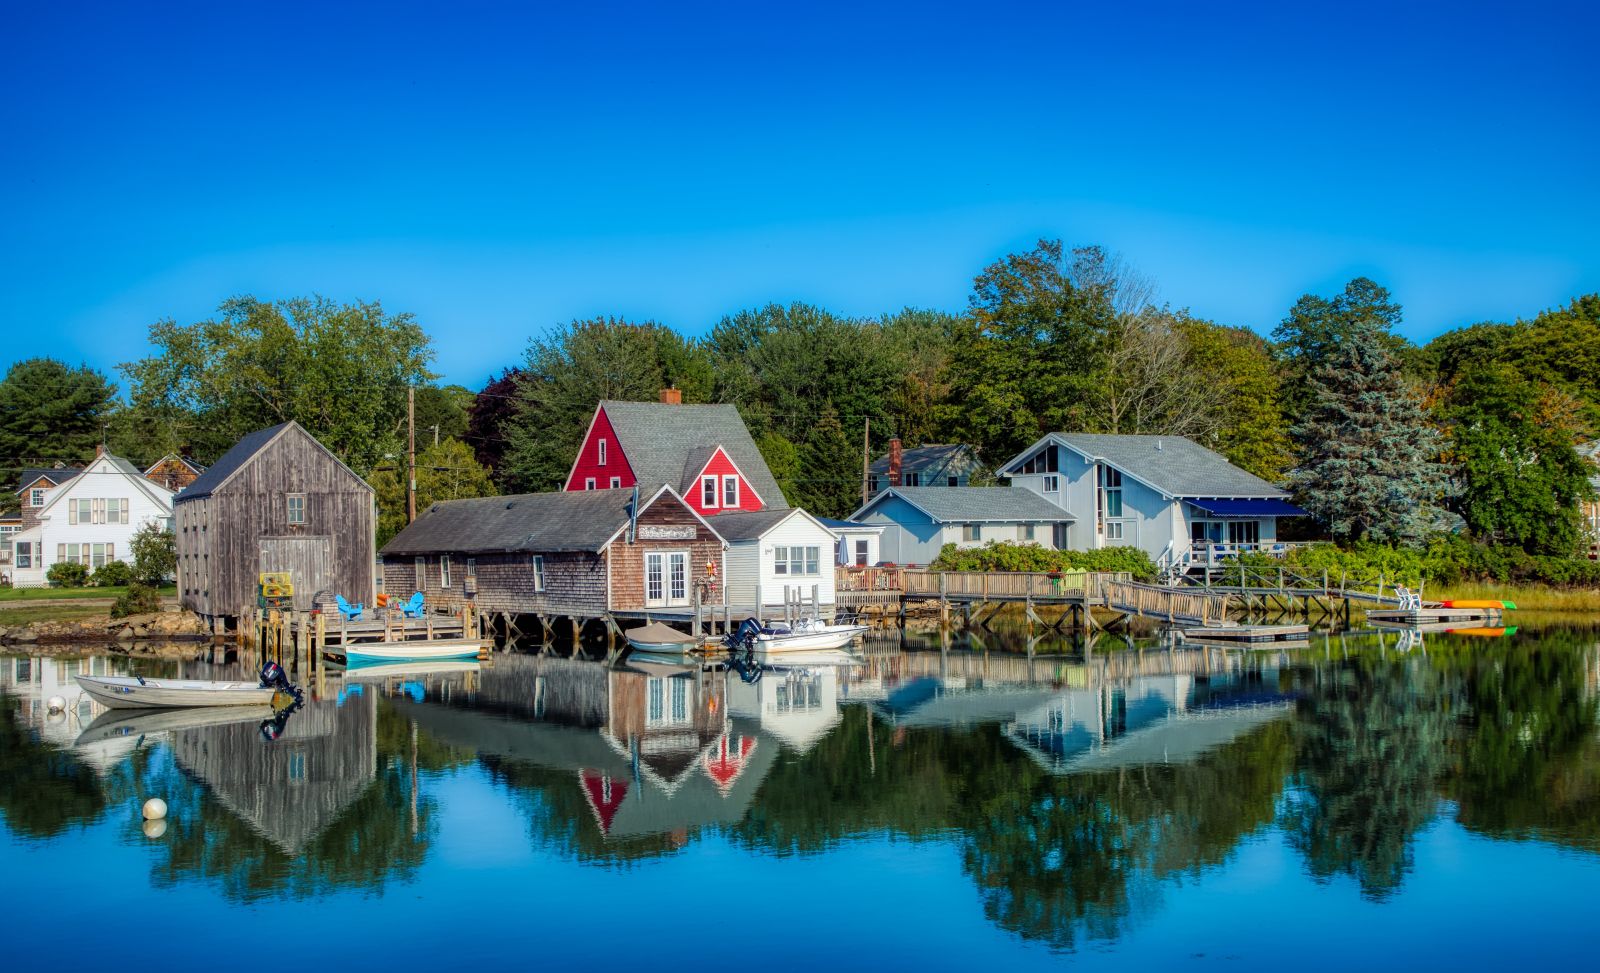 Reflections of houses in Kennenbunk Port in Maine USA